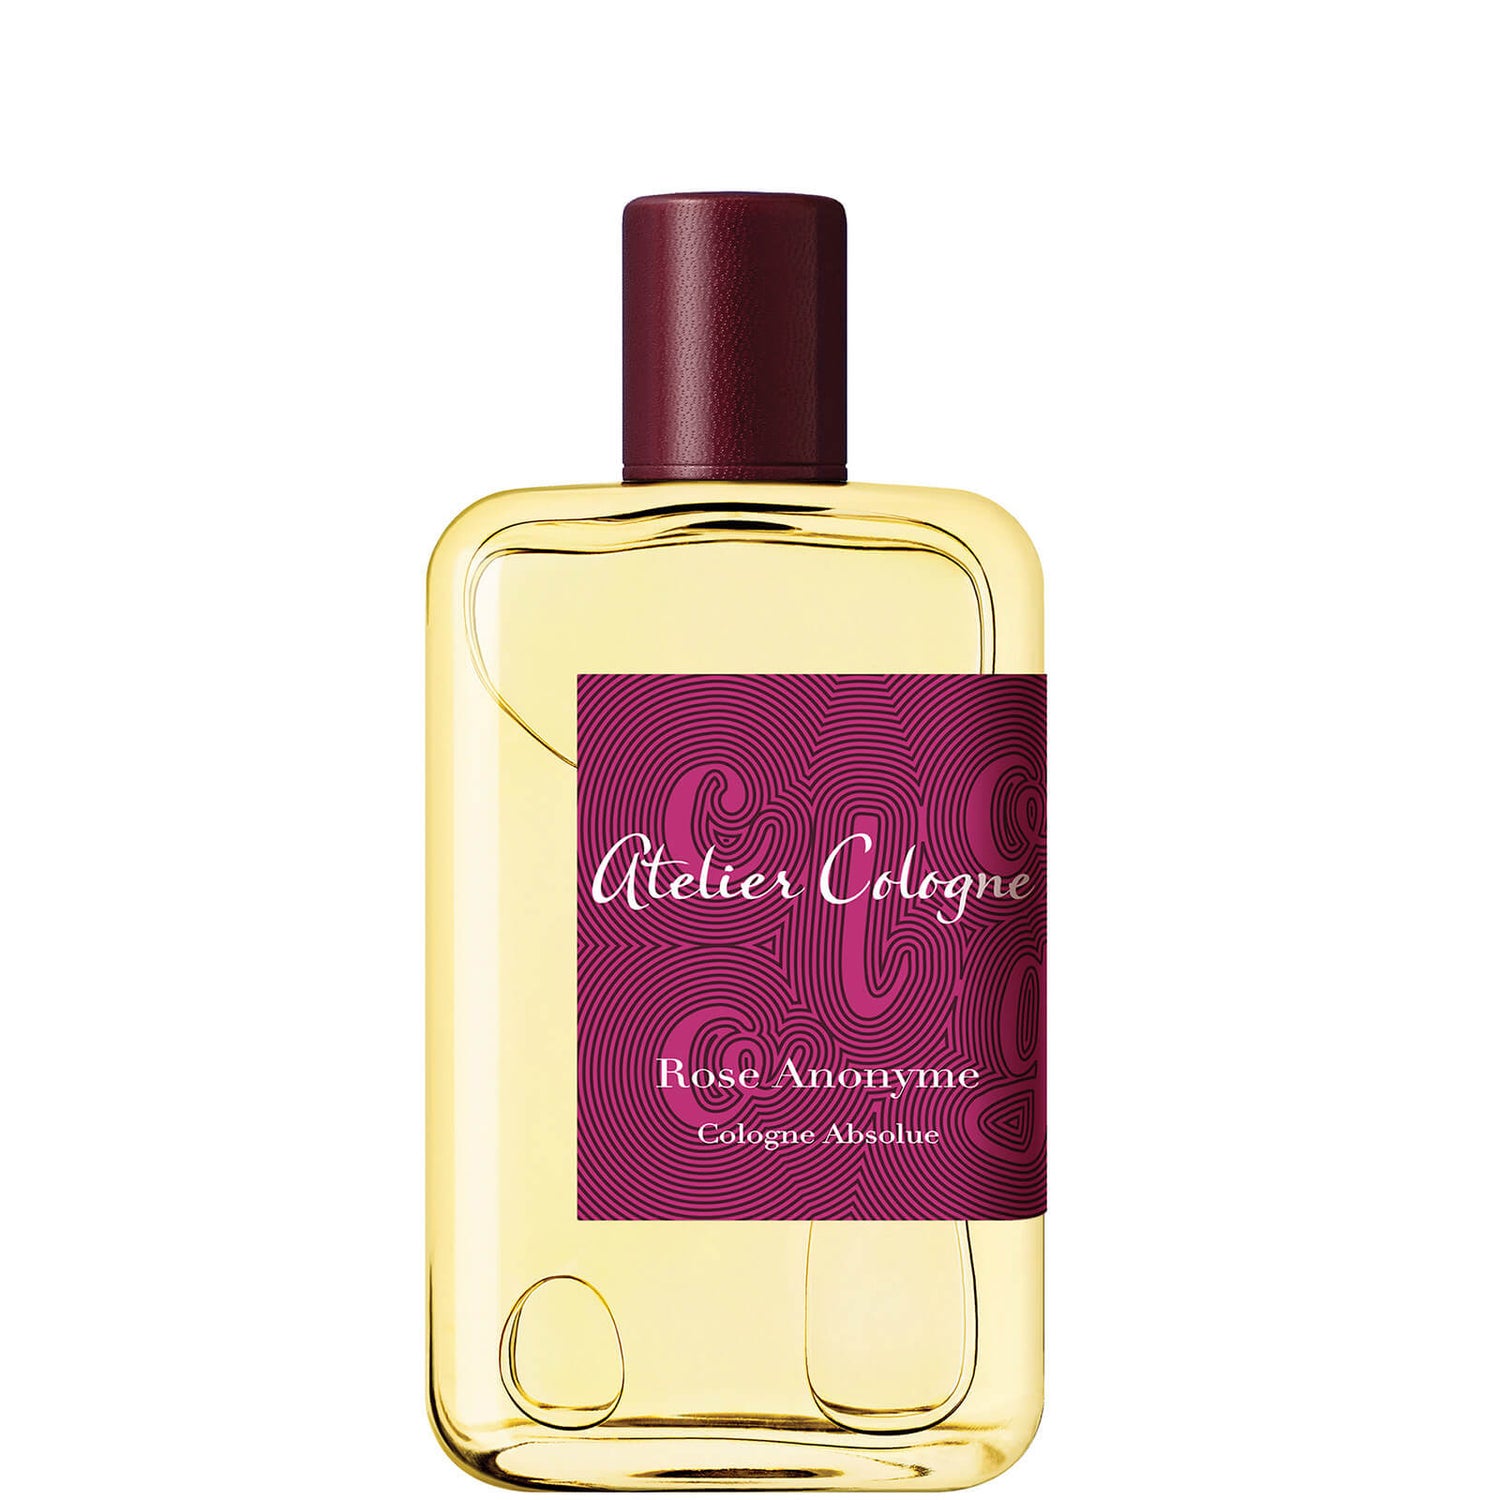 Atelier Cologne Rose Anonyme Cologne Absolue 200ml